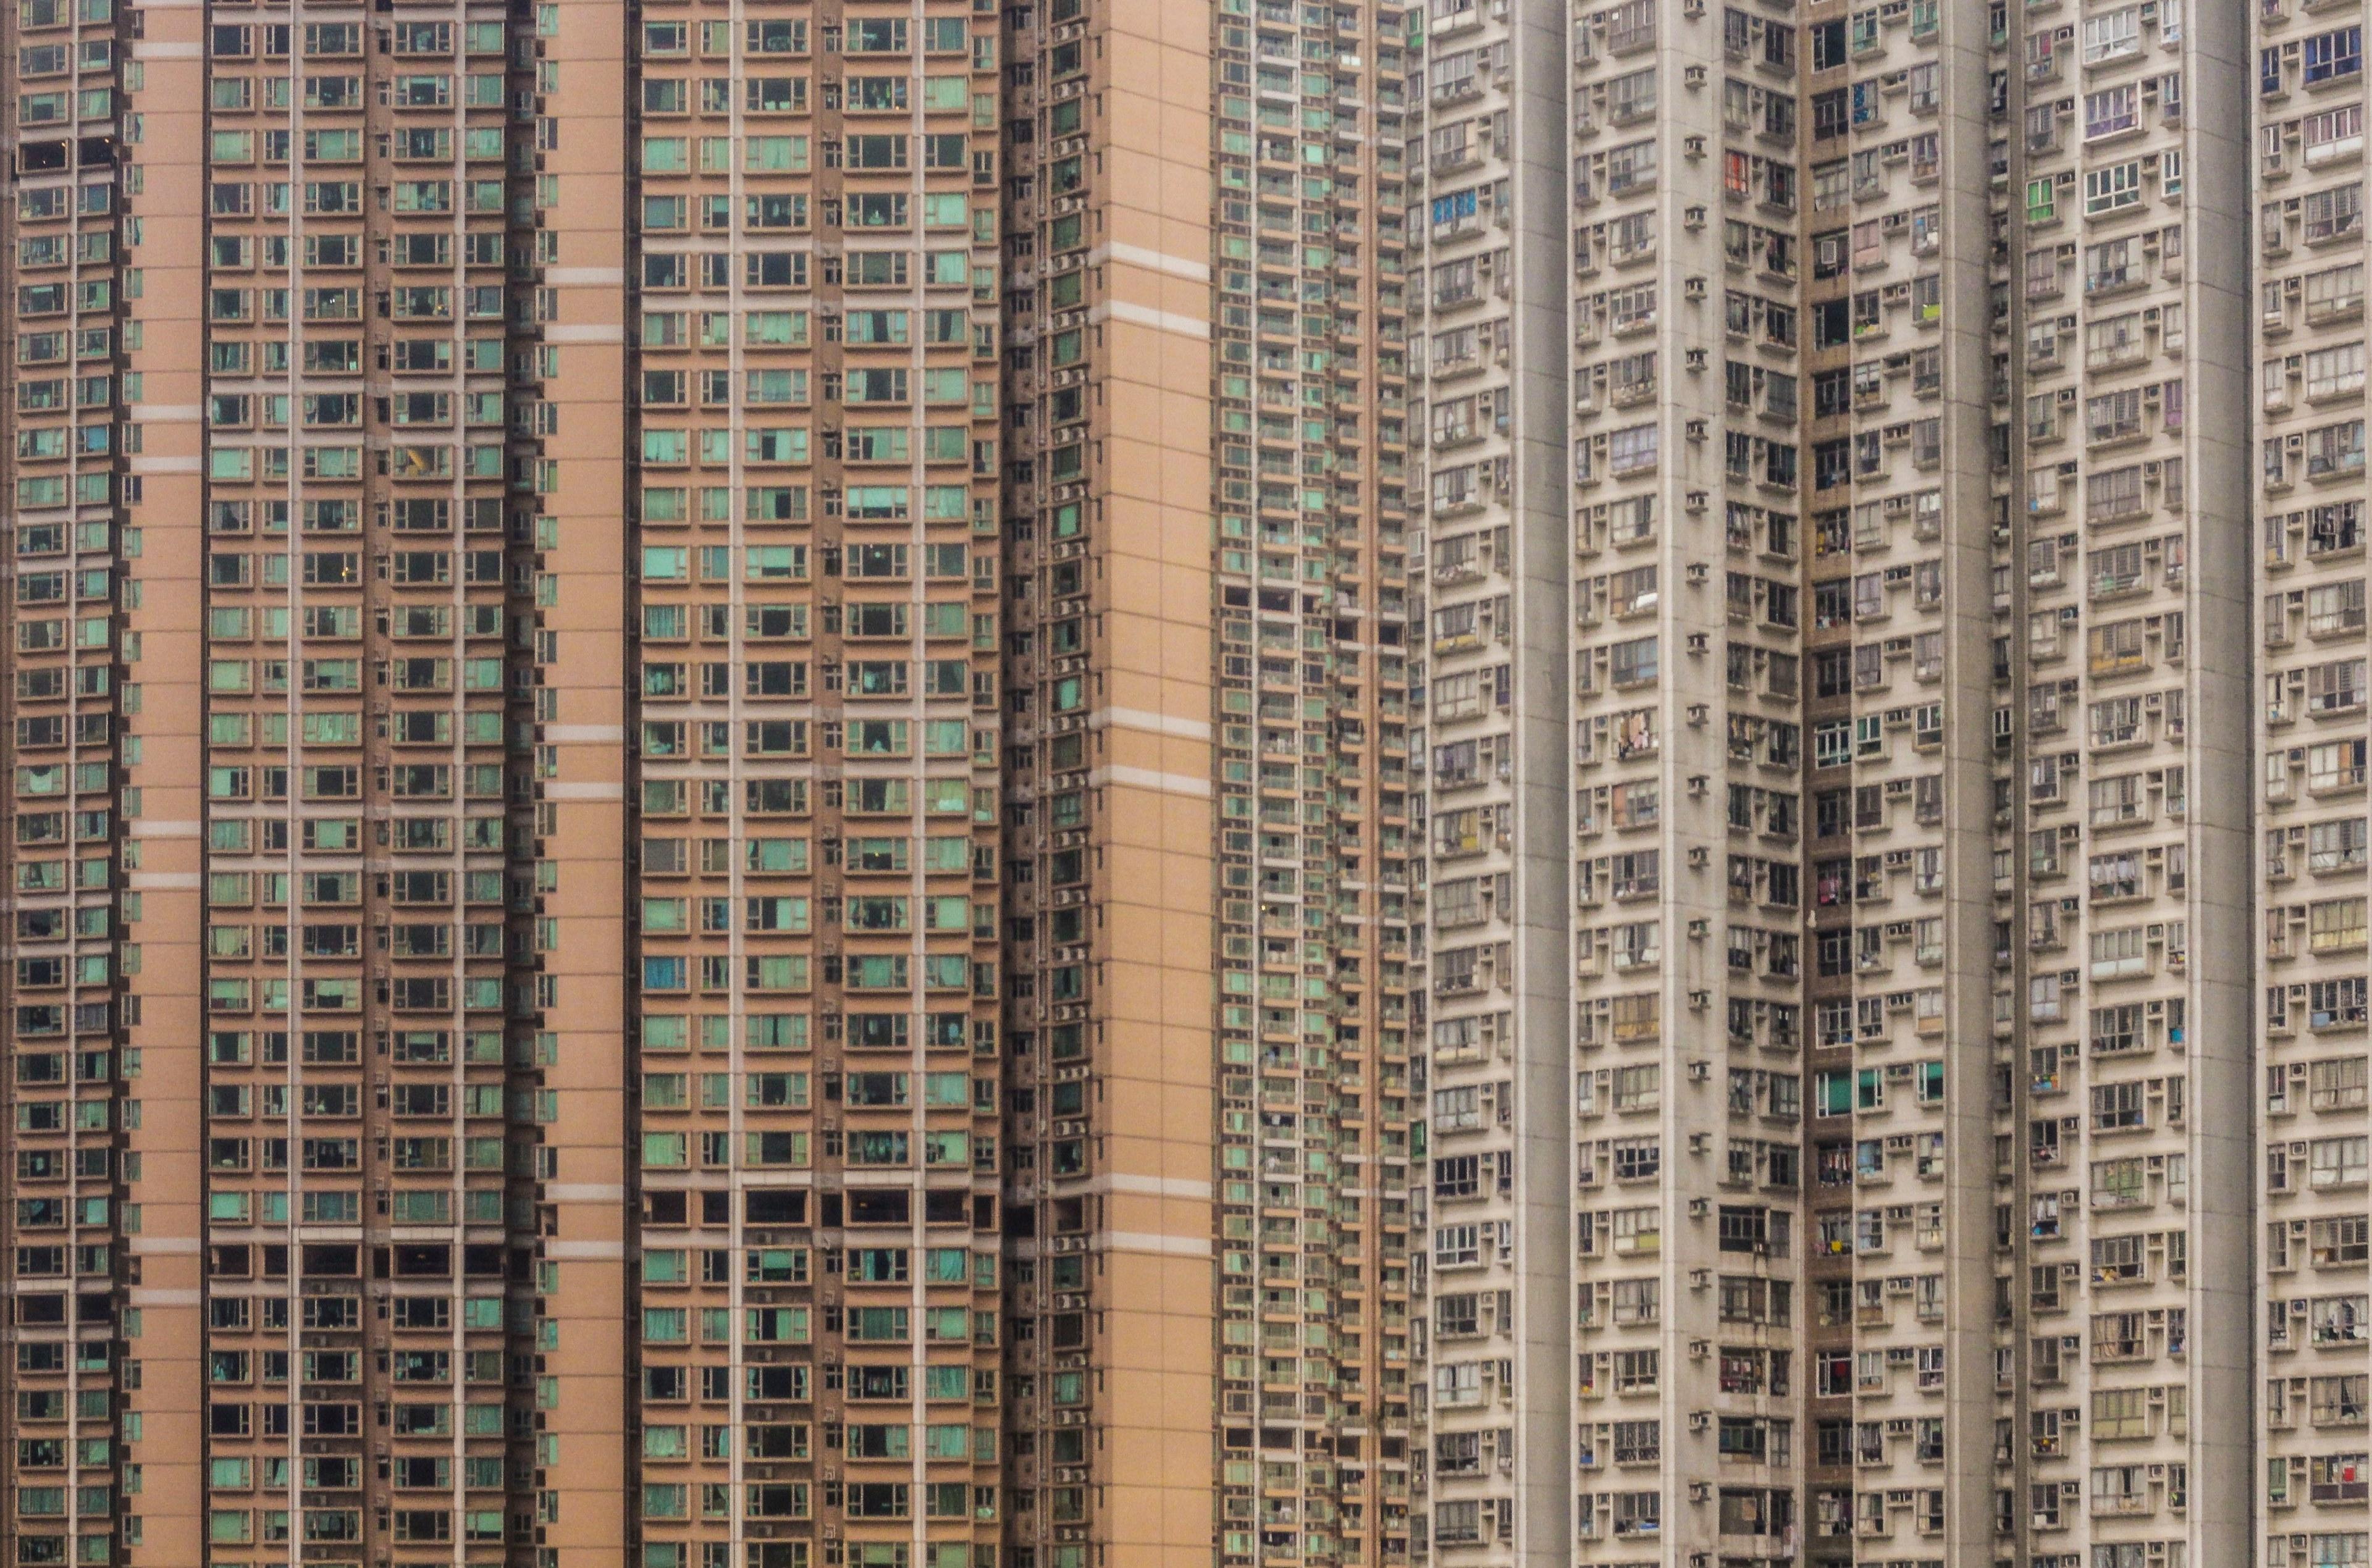 skyscrapers in hong kong 4k wallpaper and background